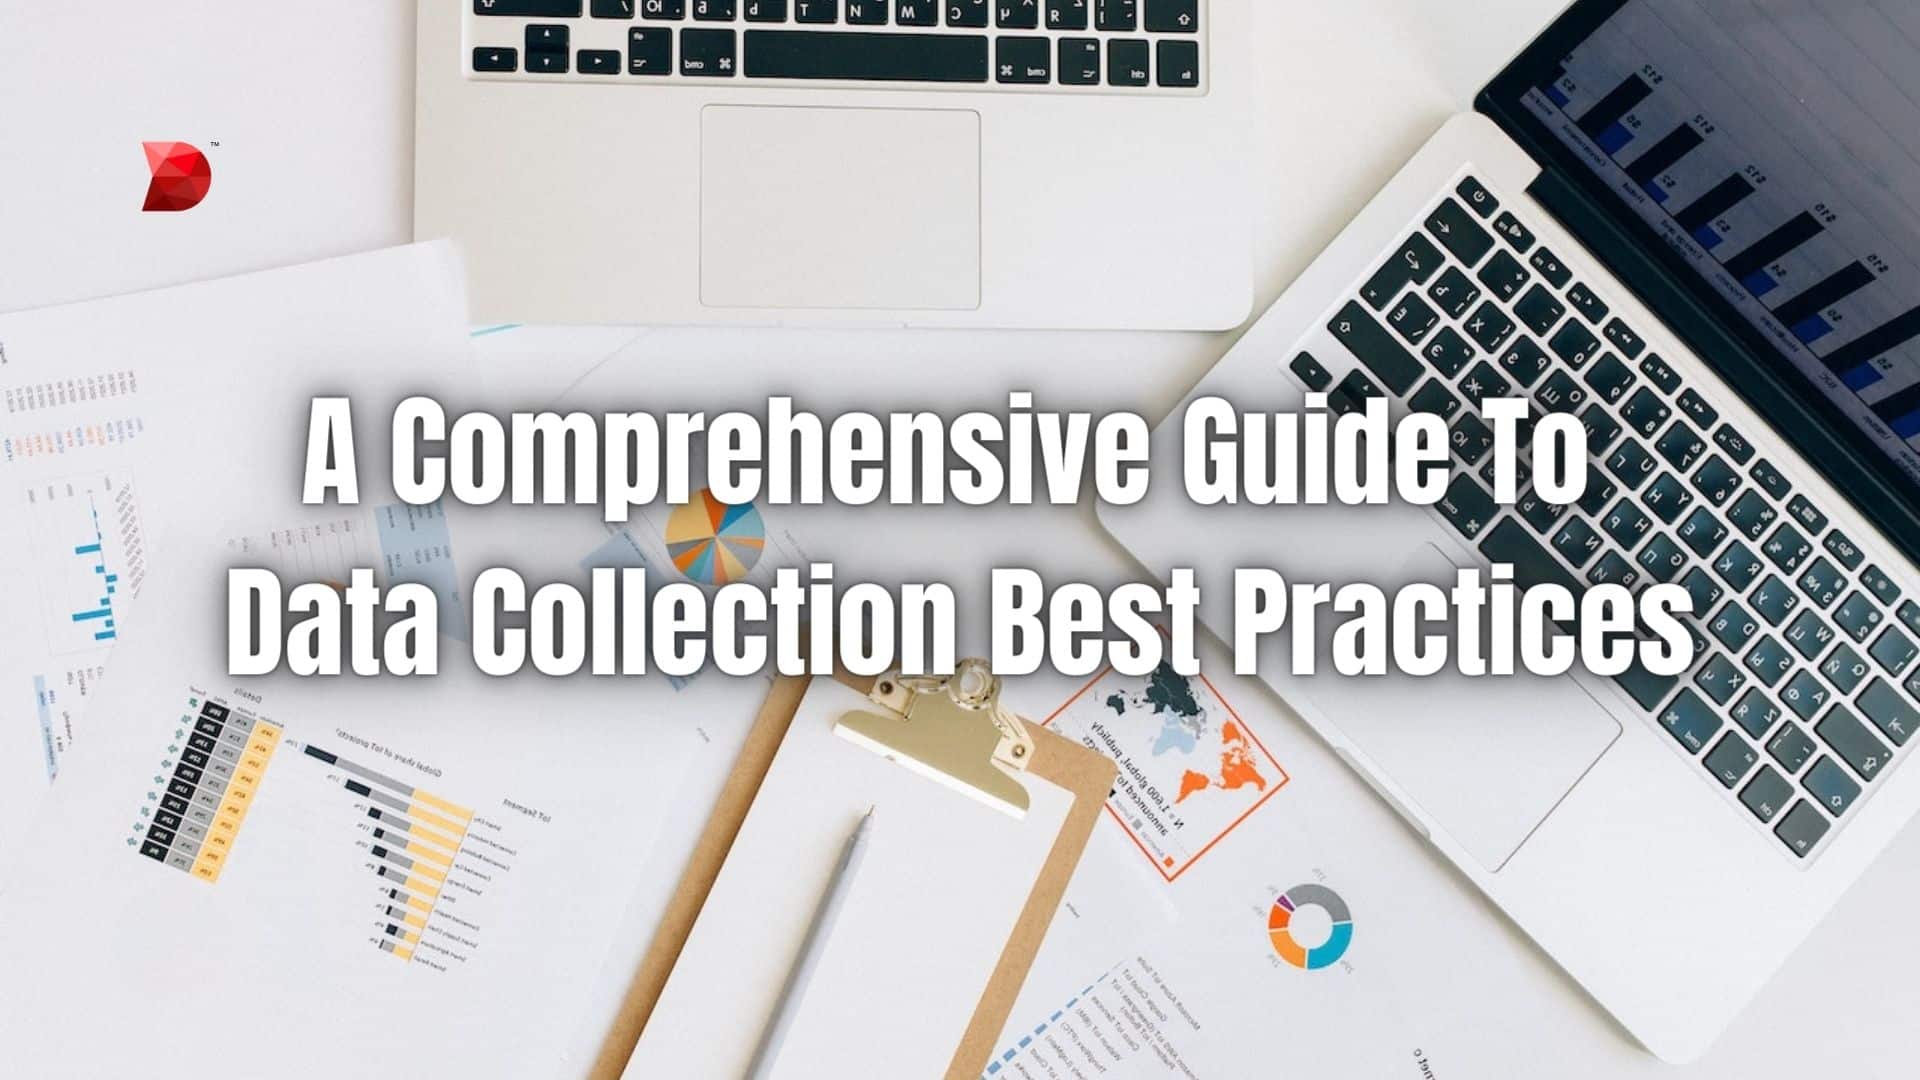 A Comprehensive Guide To Data Collection Best Practices